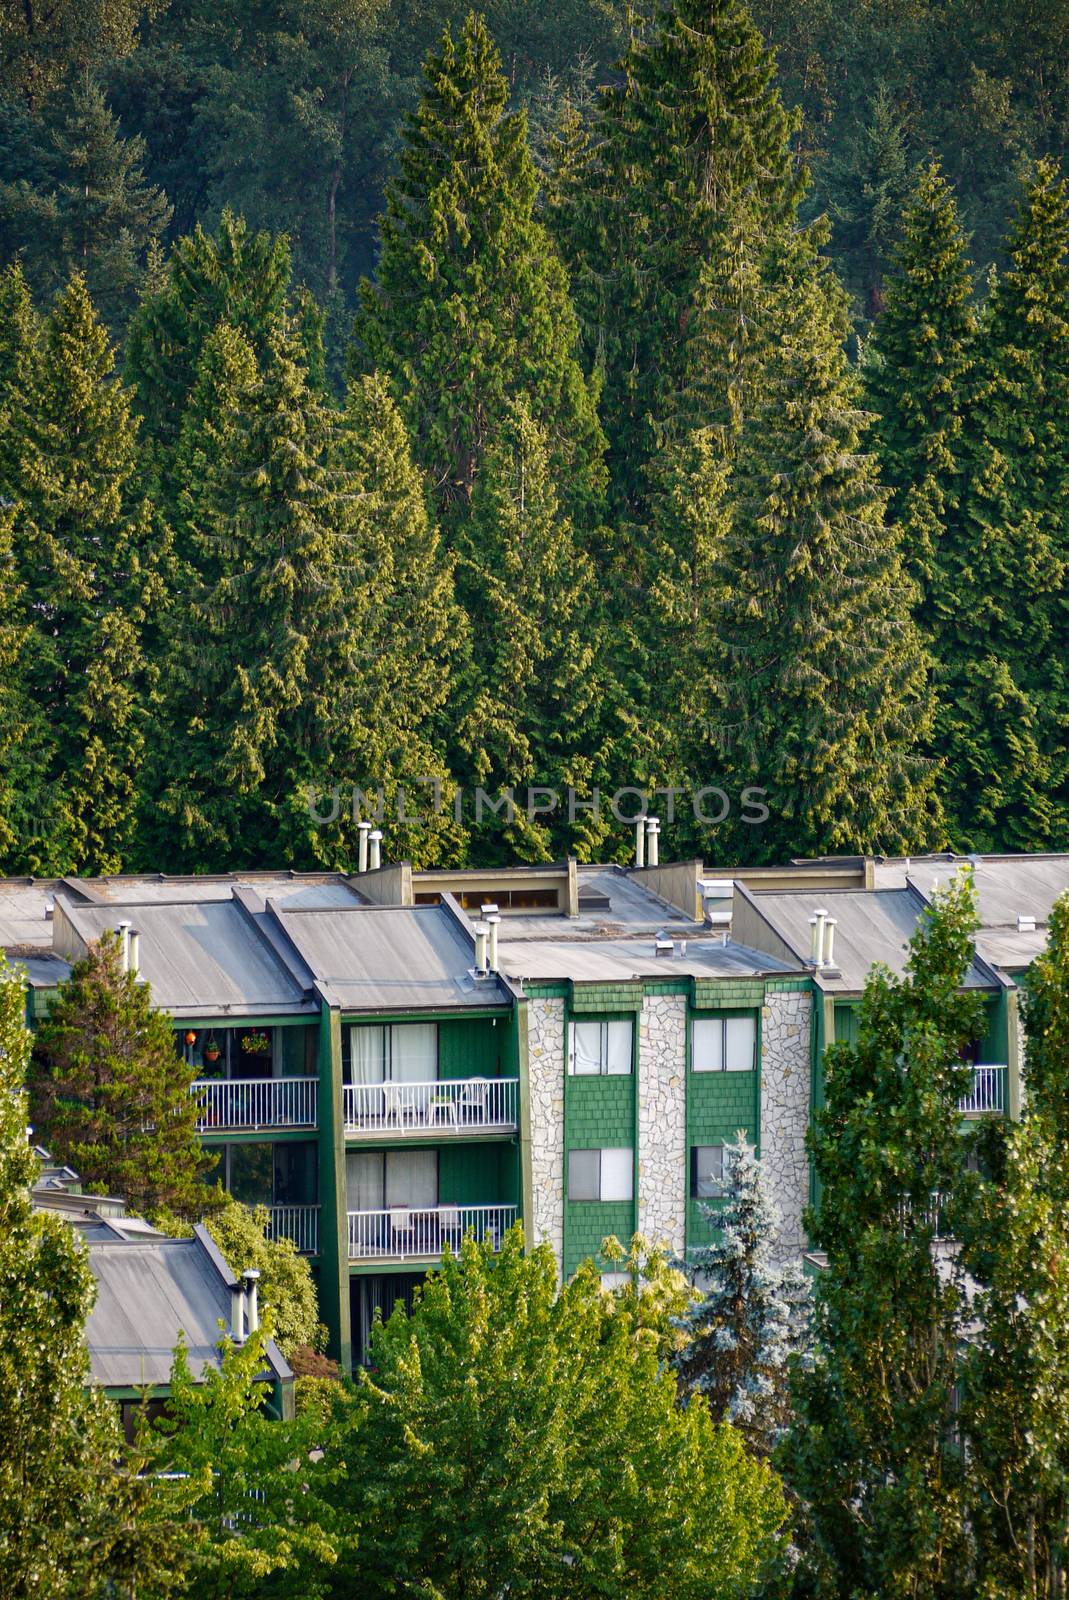 Top of low-rise residential building on green trees background by Imagenet